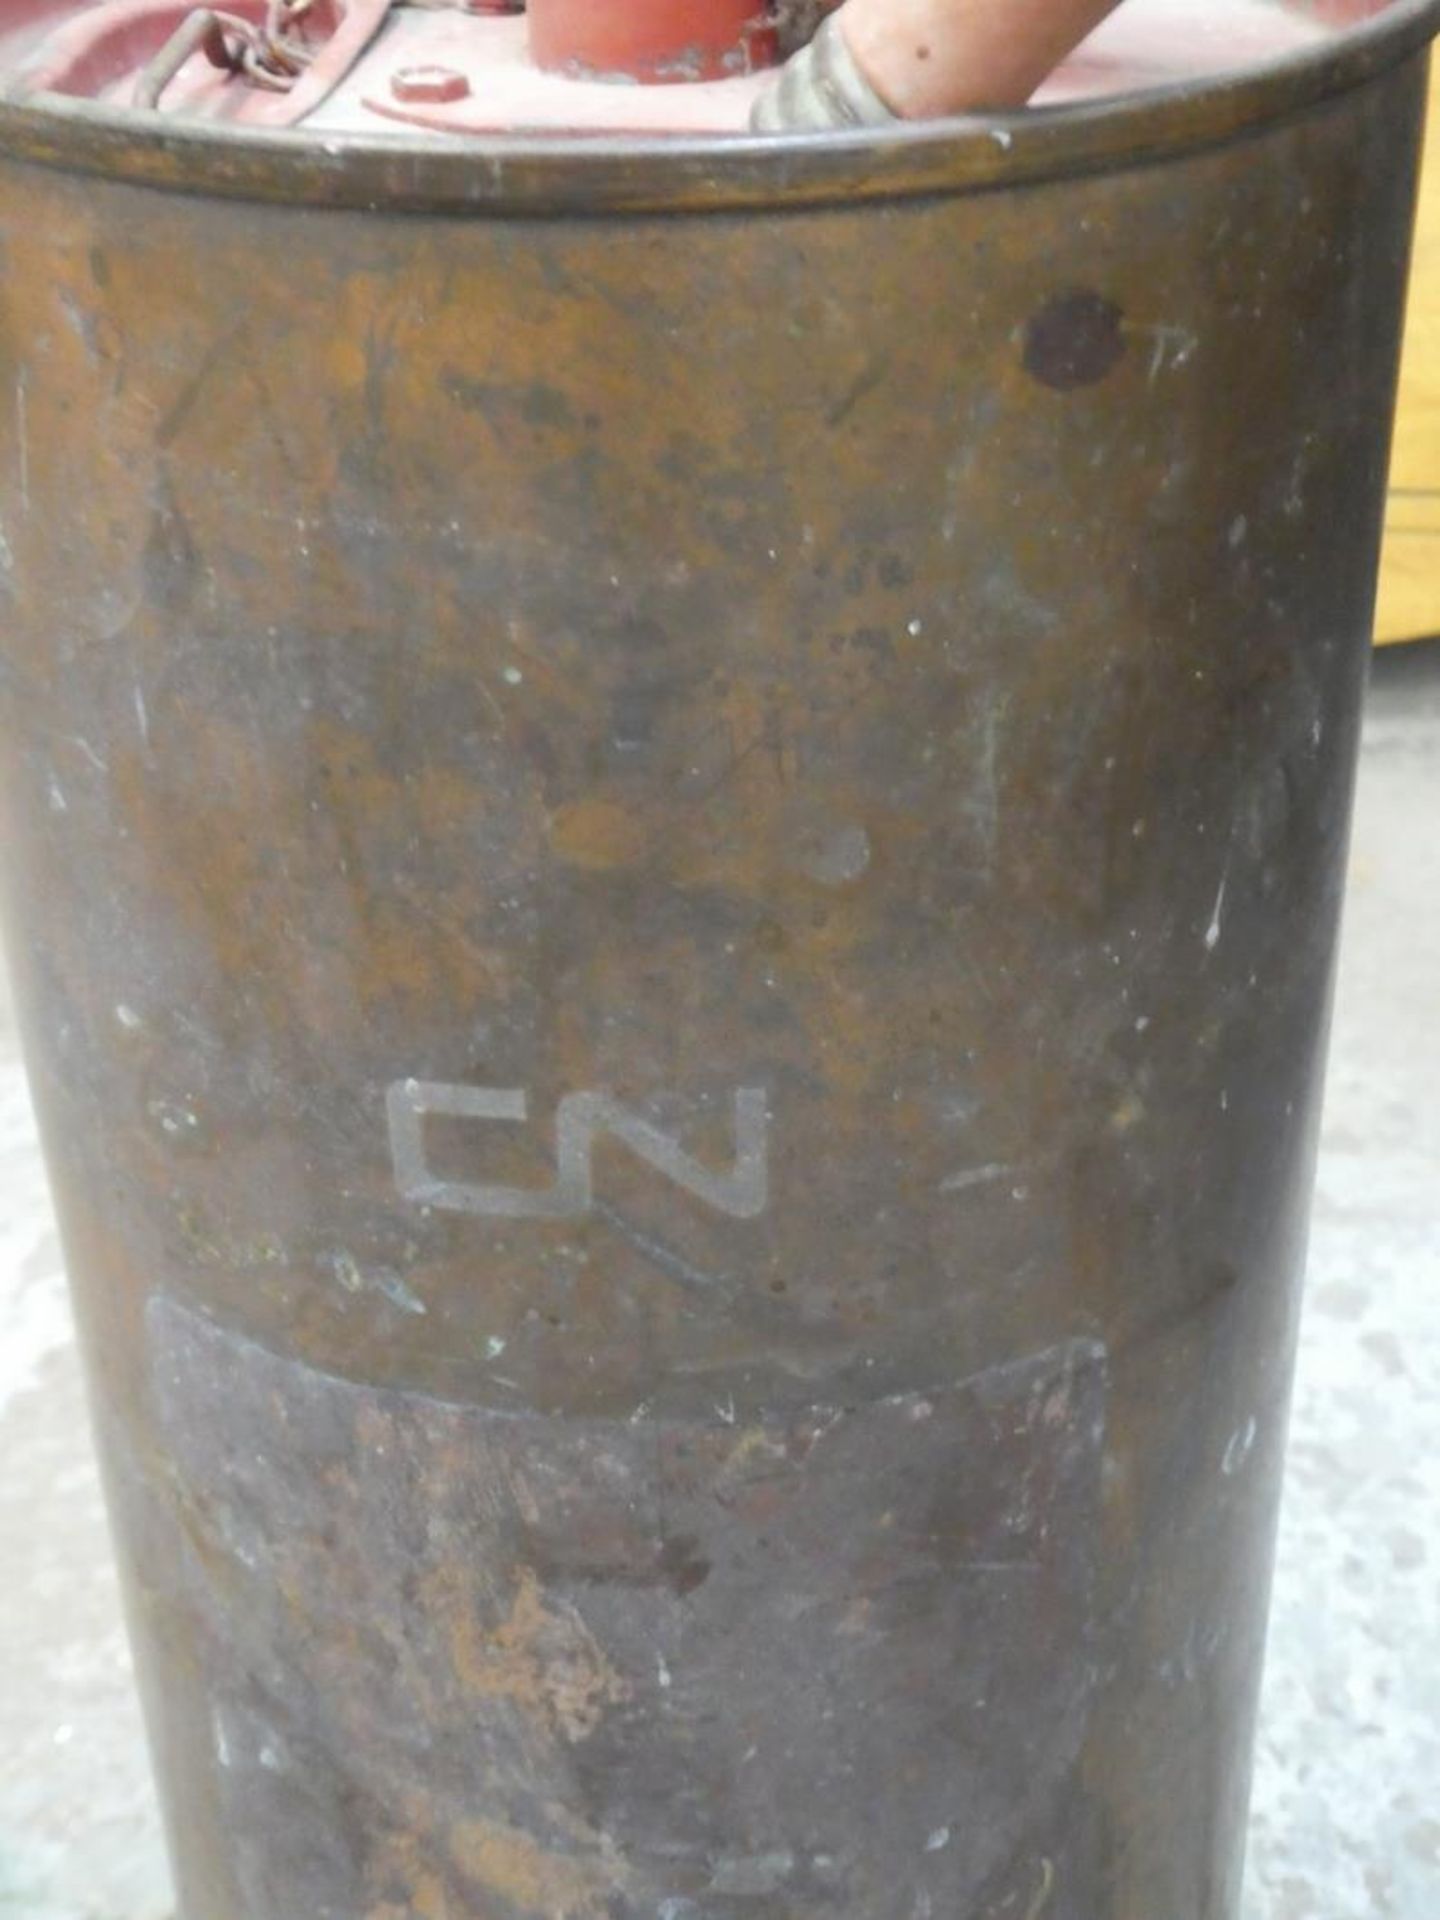 CN BRASS FIRE EXTINGUISHER 24"H - Image 2 of 4